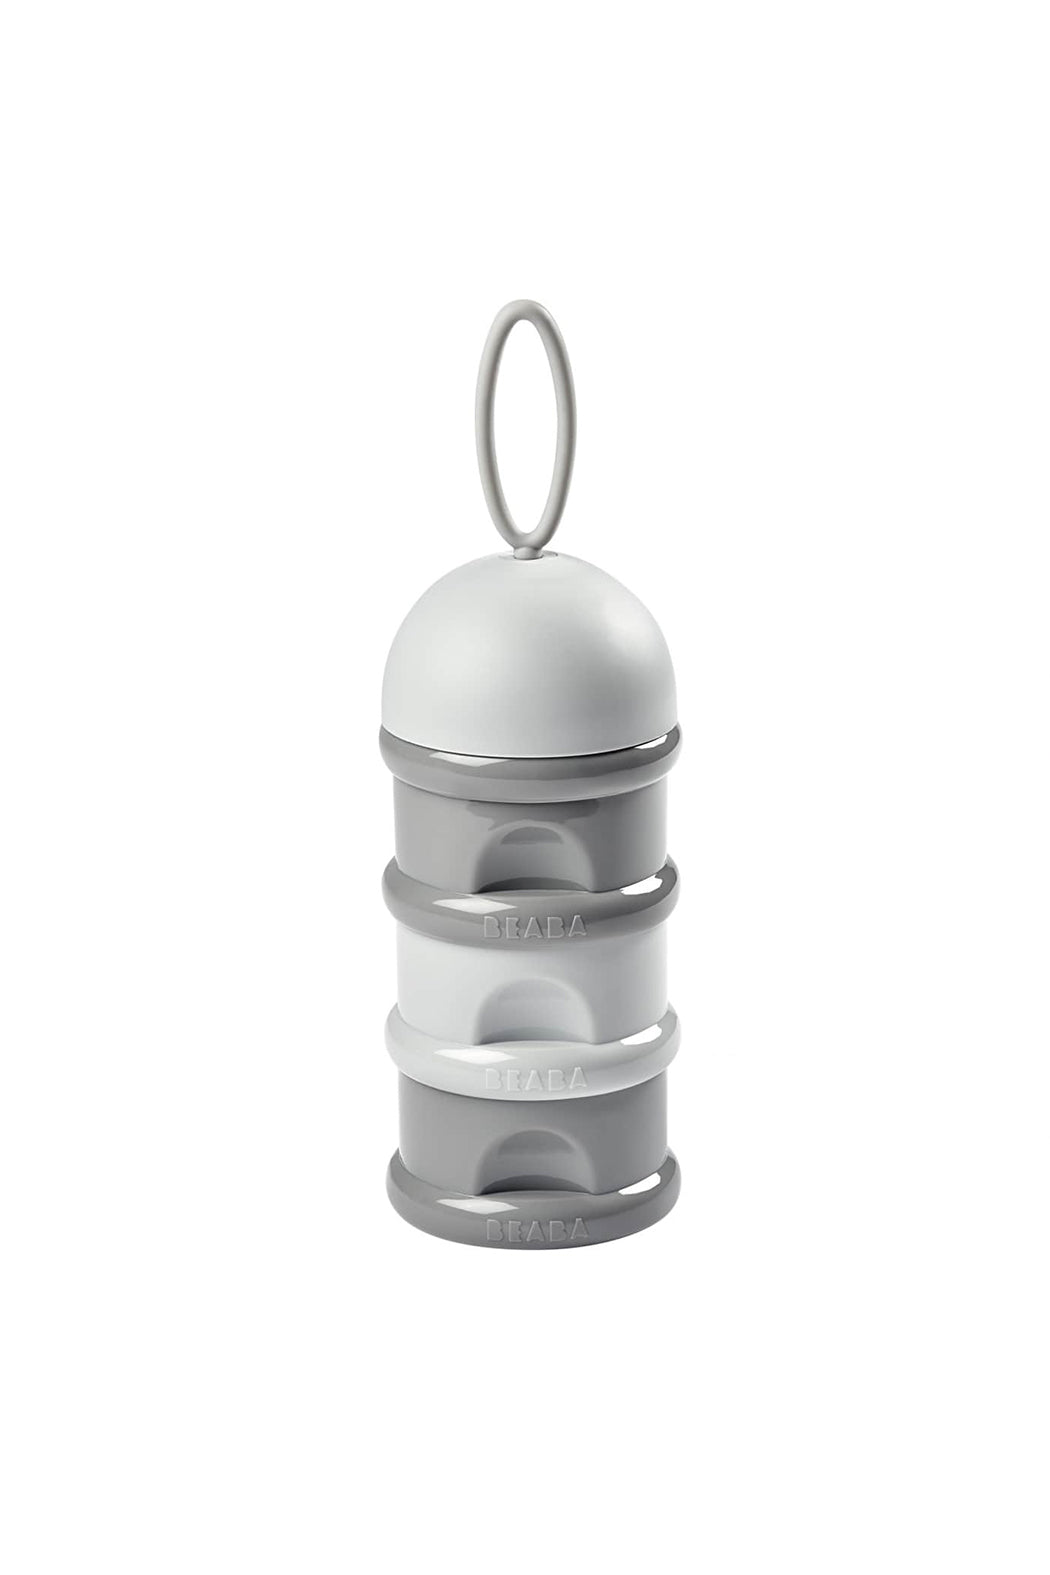 Beaba Formula Snack Container - Cloud